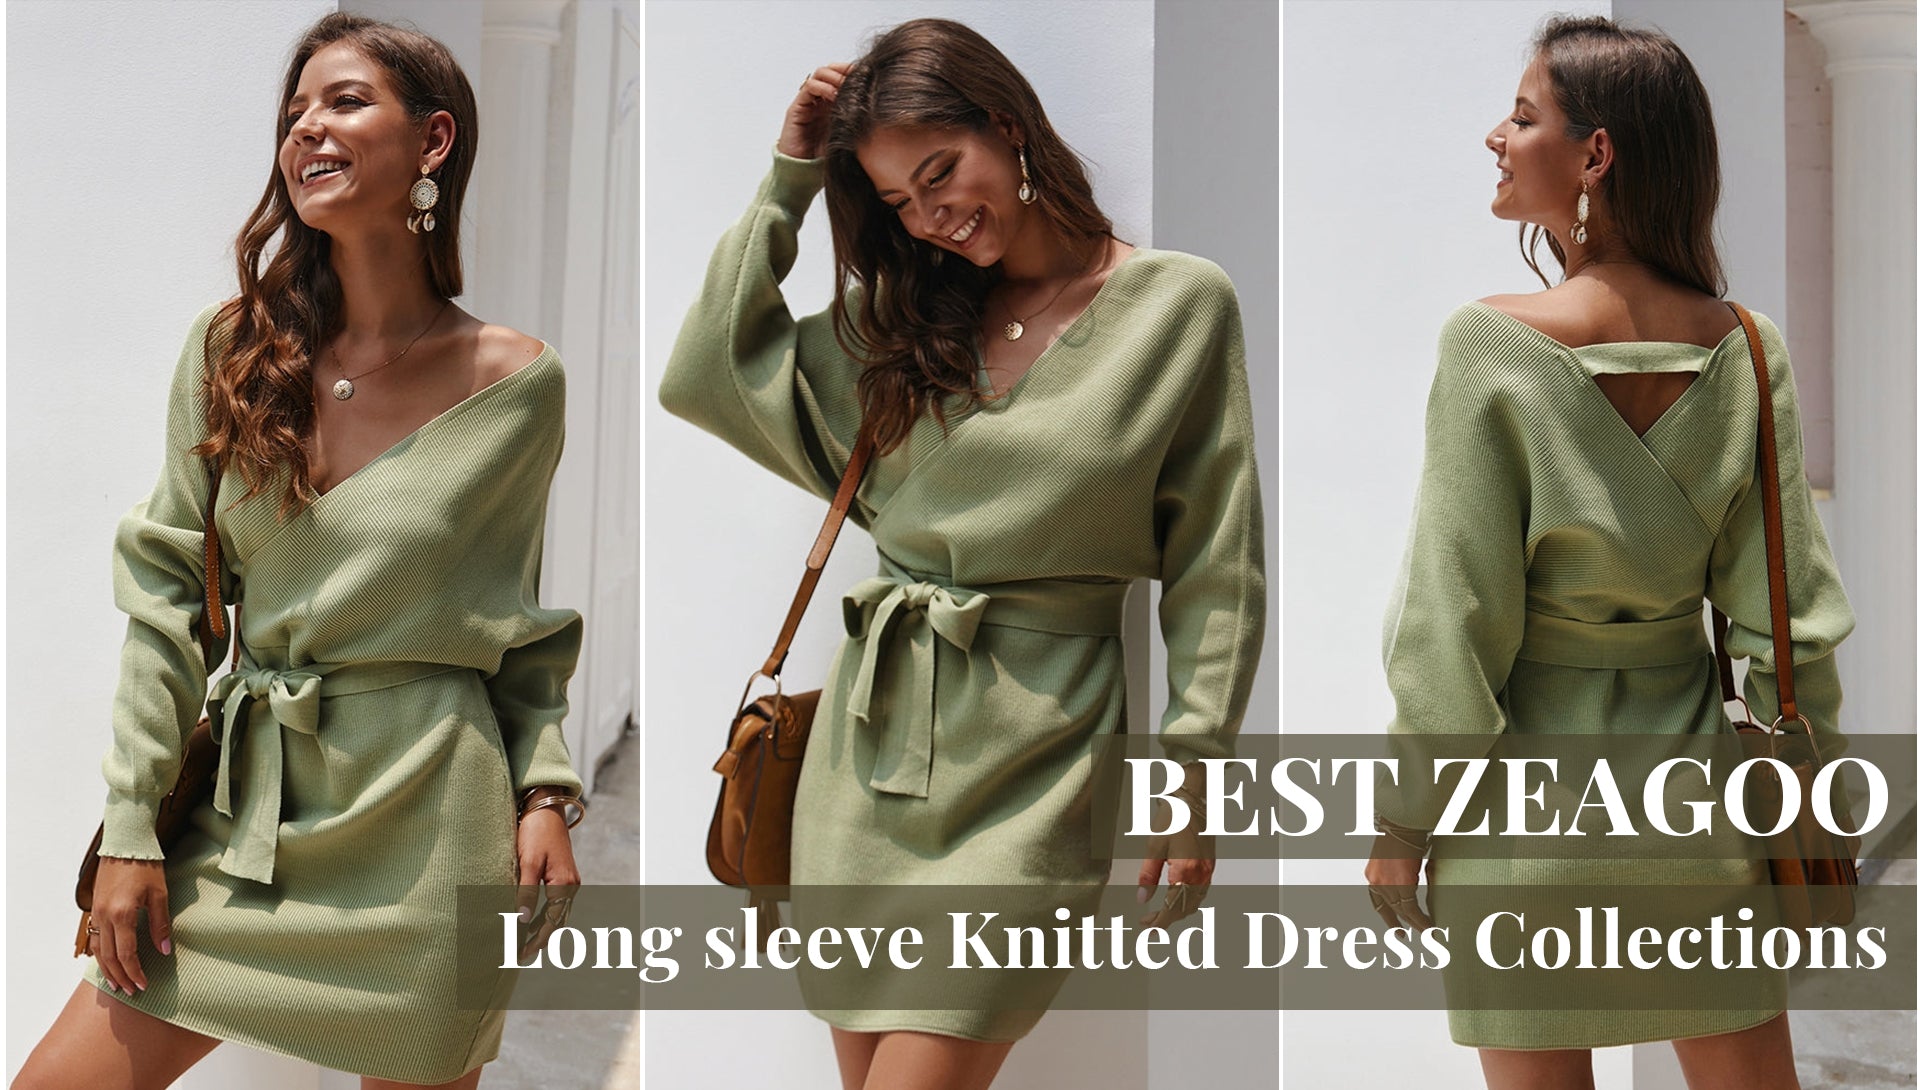 Best Long sleeve Knitted Dress Collections from Zeagoo